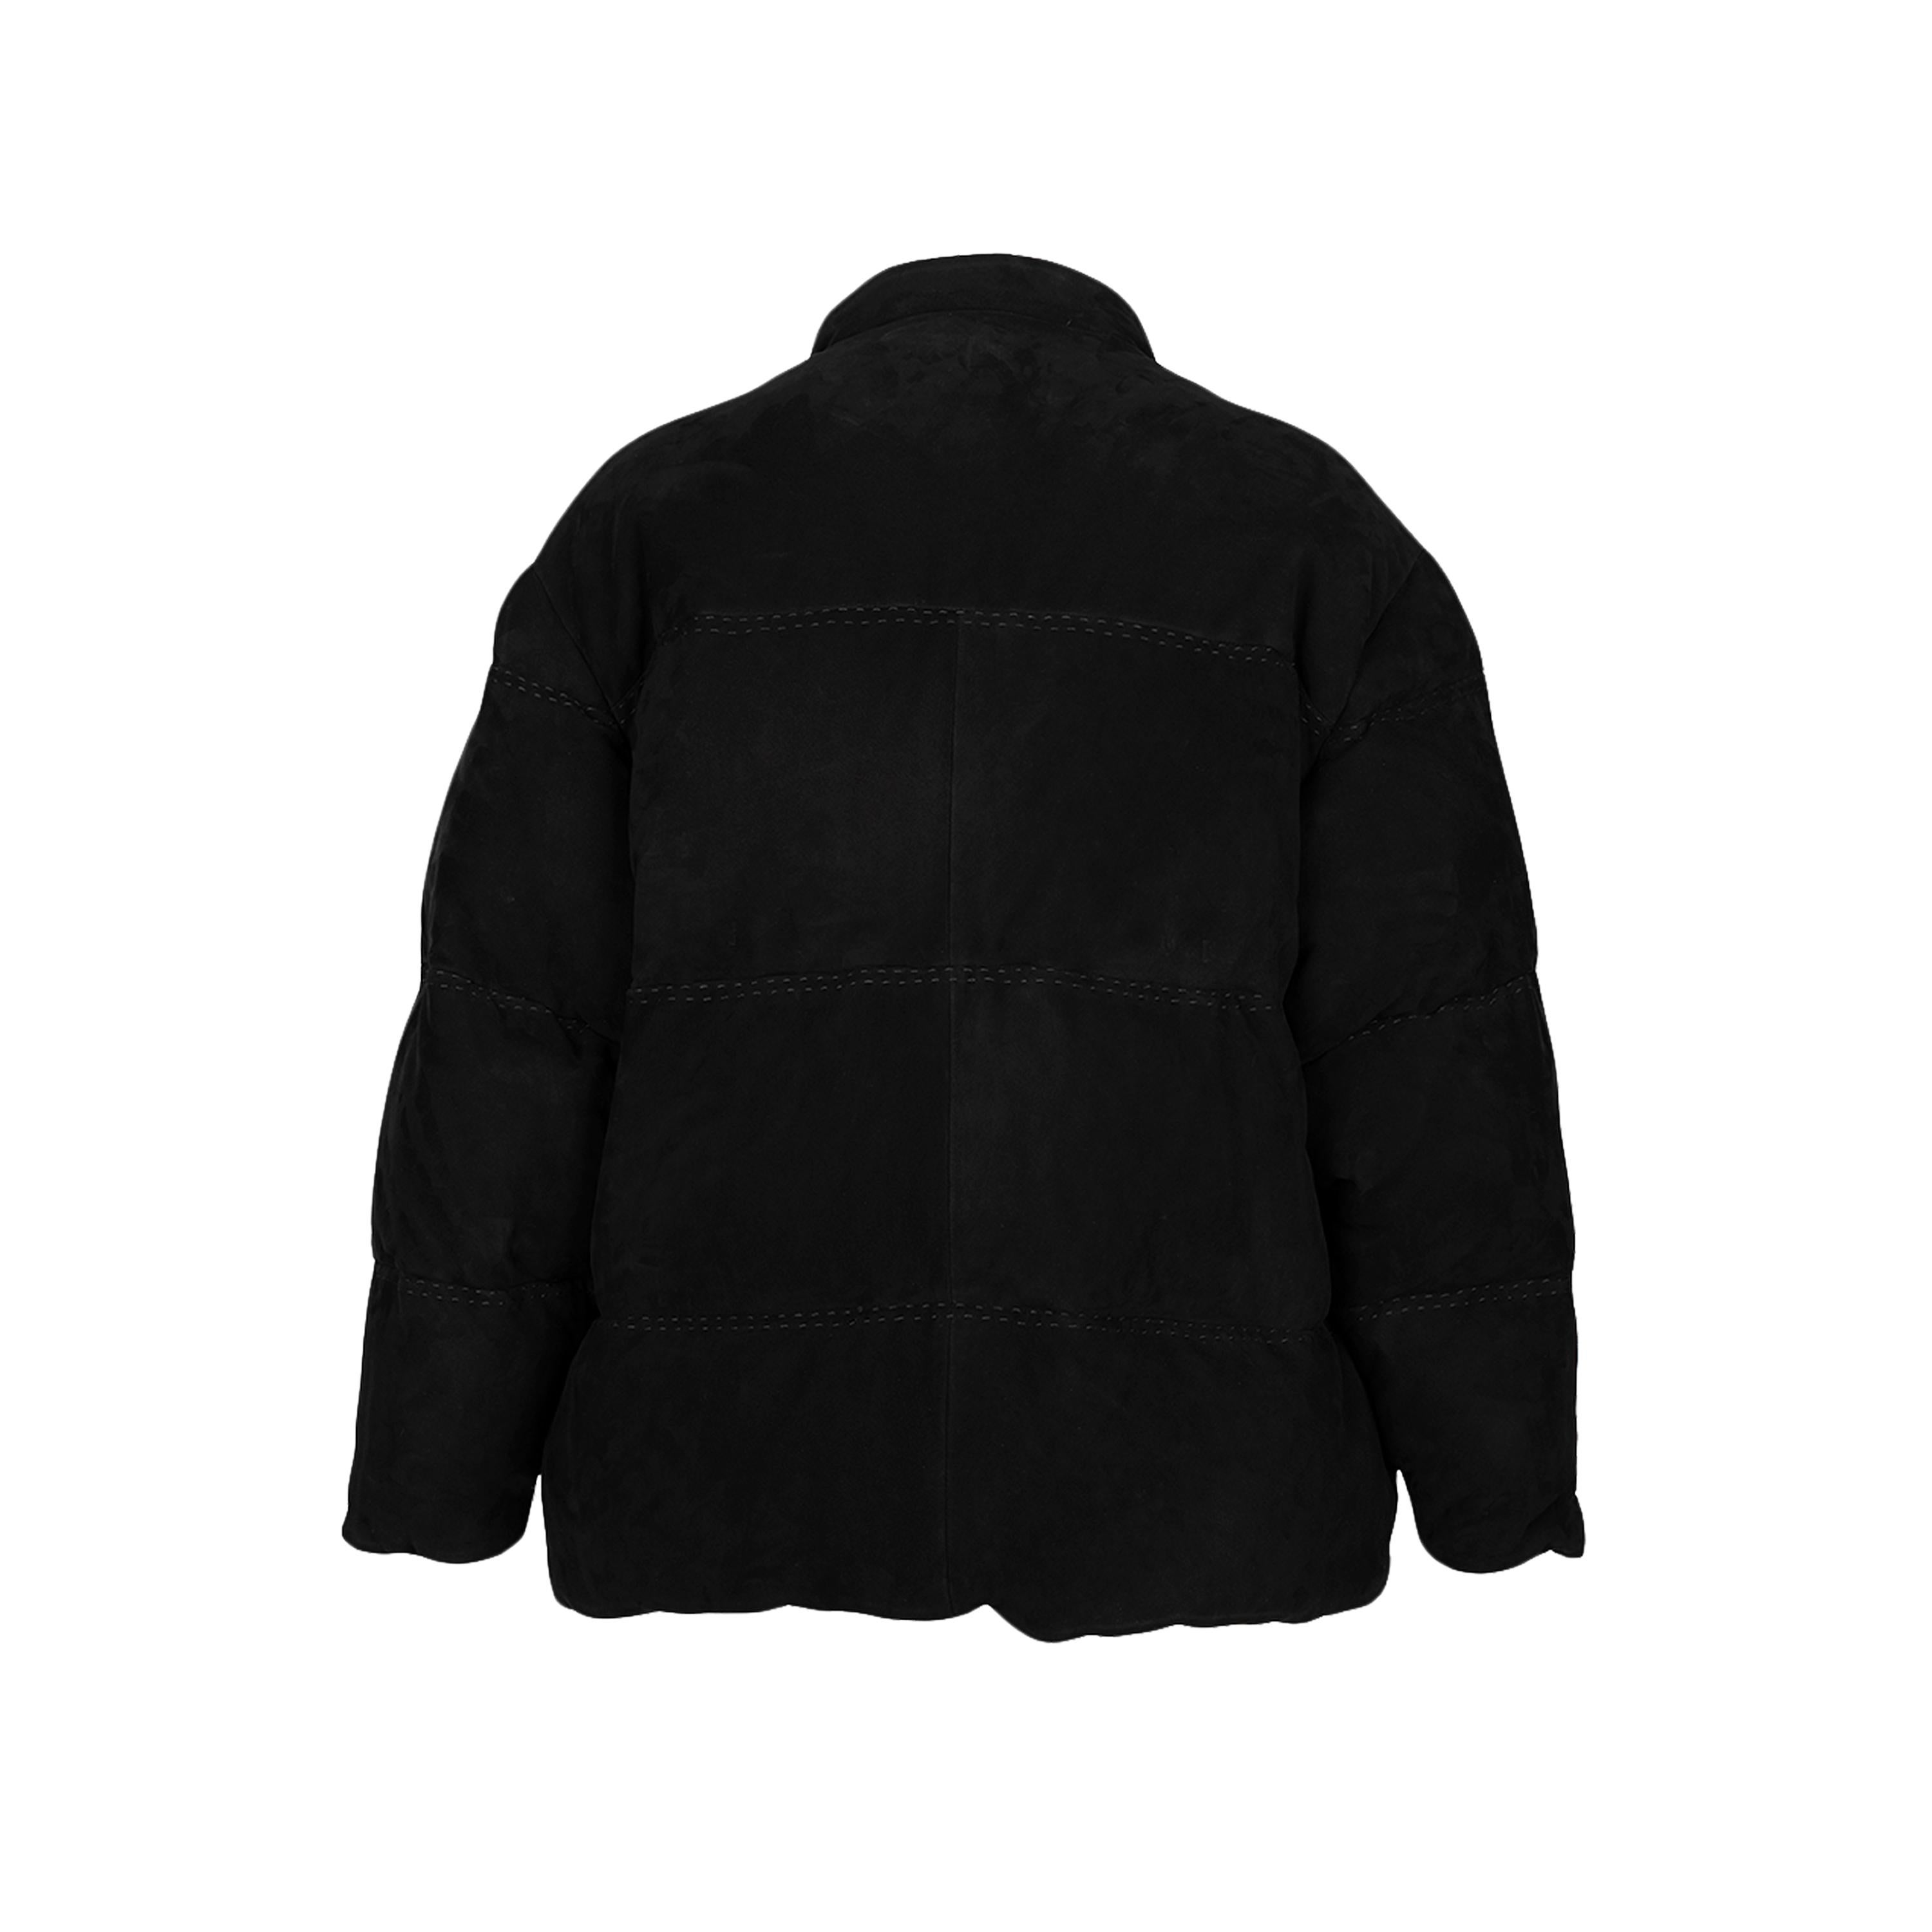 Hermès black suede puffer coat embellished with printed lining, long sleeve, button fastening, band quilting.